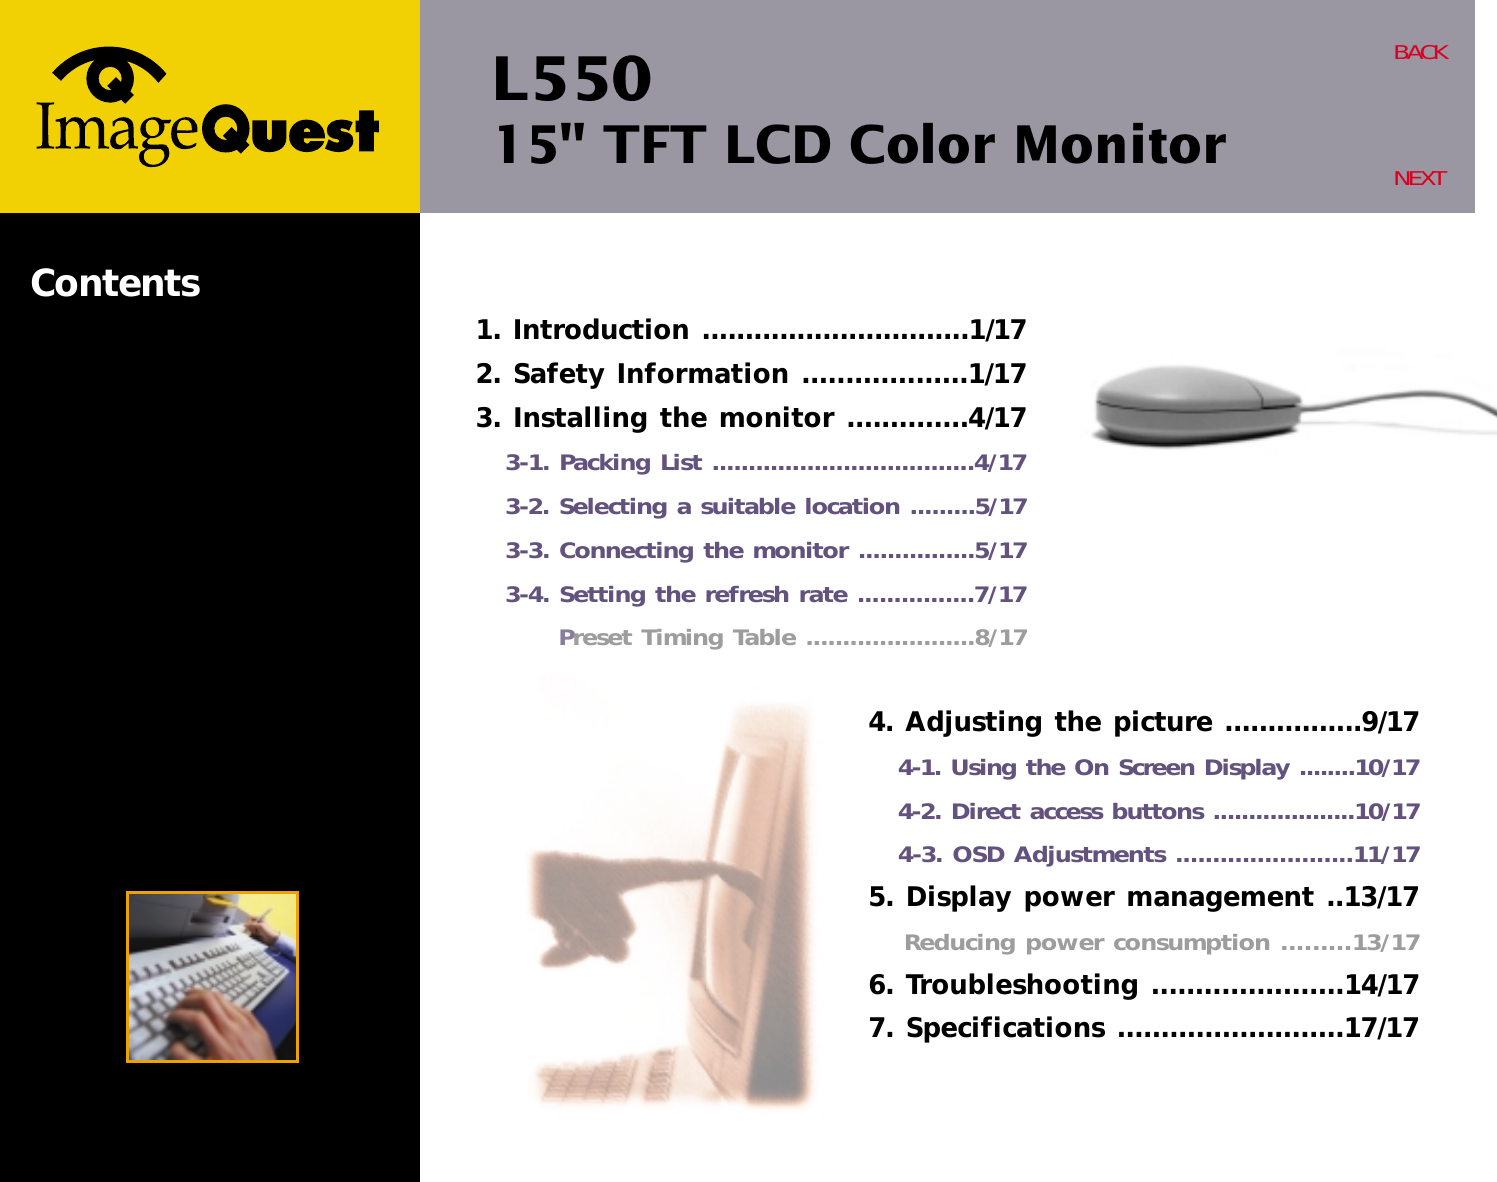 L550 15&quot; TFT LCD Color MonitorBACKNEXTContents4. Adjusting the picture ................9/174-1. Using the On Screen Display ........10/174-2. Direct access buttons ....................10/174-3. OSD Adjustments ........................11/175. Display power management ..13/17Reducing power consumption .........13/176. Troubleshooting ......................14/177. Specifications ..........................17/171. Introduction ...............................1/172. Safety Information ...................1/173. Installing the monitor ..............4/173-1. Packing List ....................................4/173-2. Selecting a suitable location .........5/173-3. Connecting the monitor ................5/173-4. Setting the refresh rate ................7/17Preset Timing Table .......................8/17